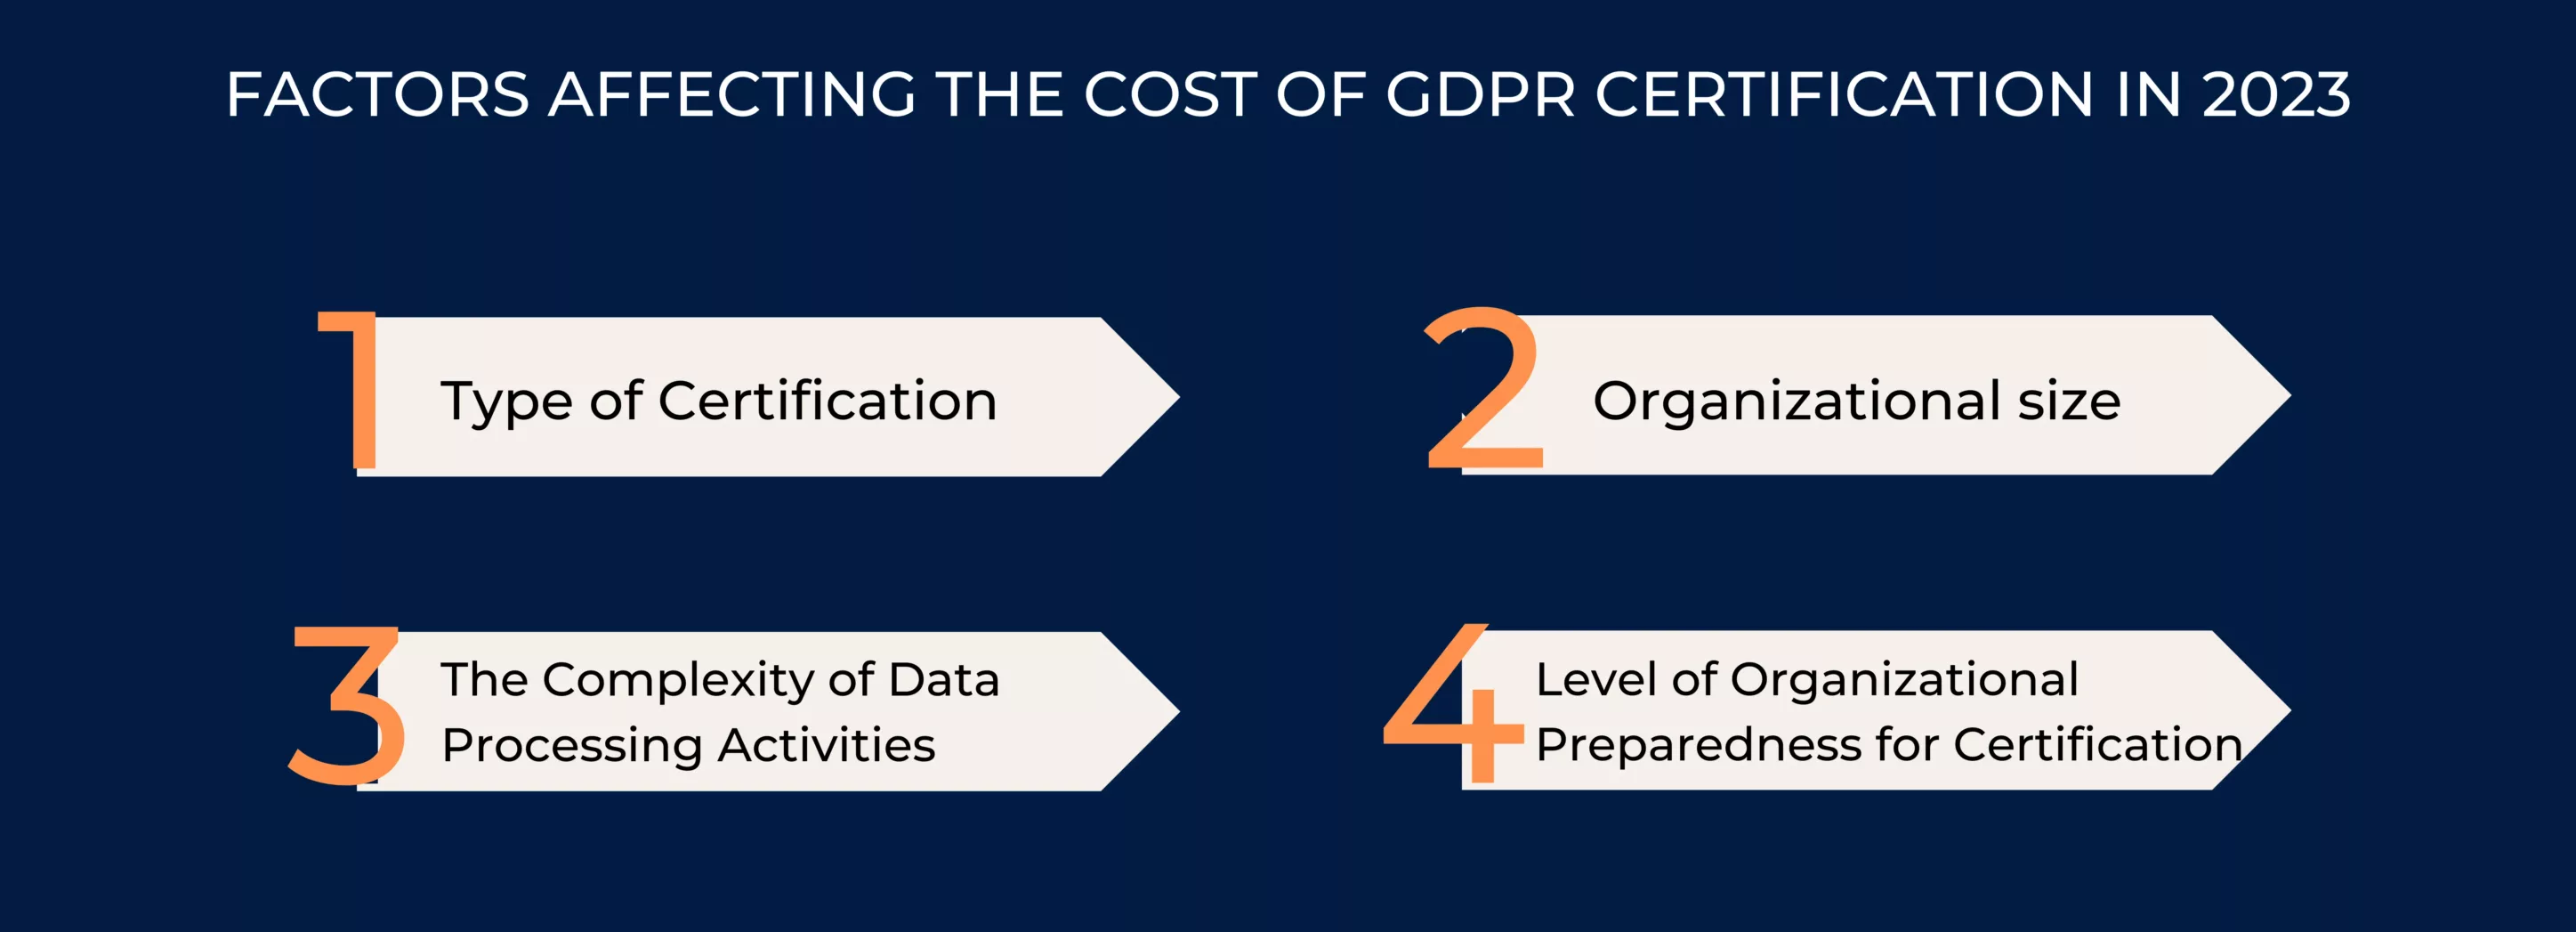 FACTORS AFFECTING GDPR COST IN 2023